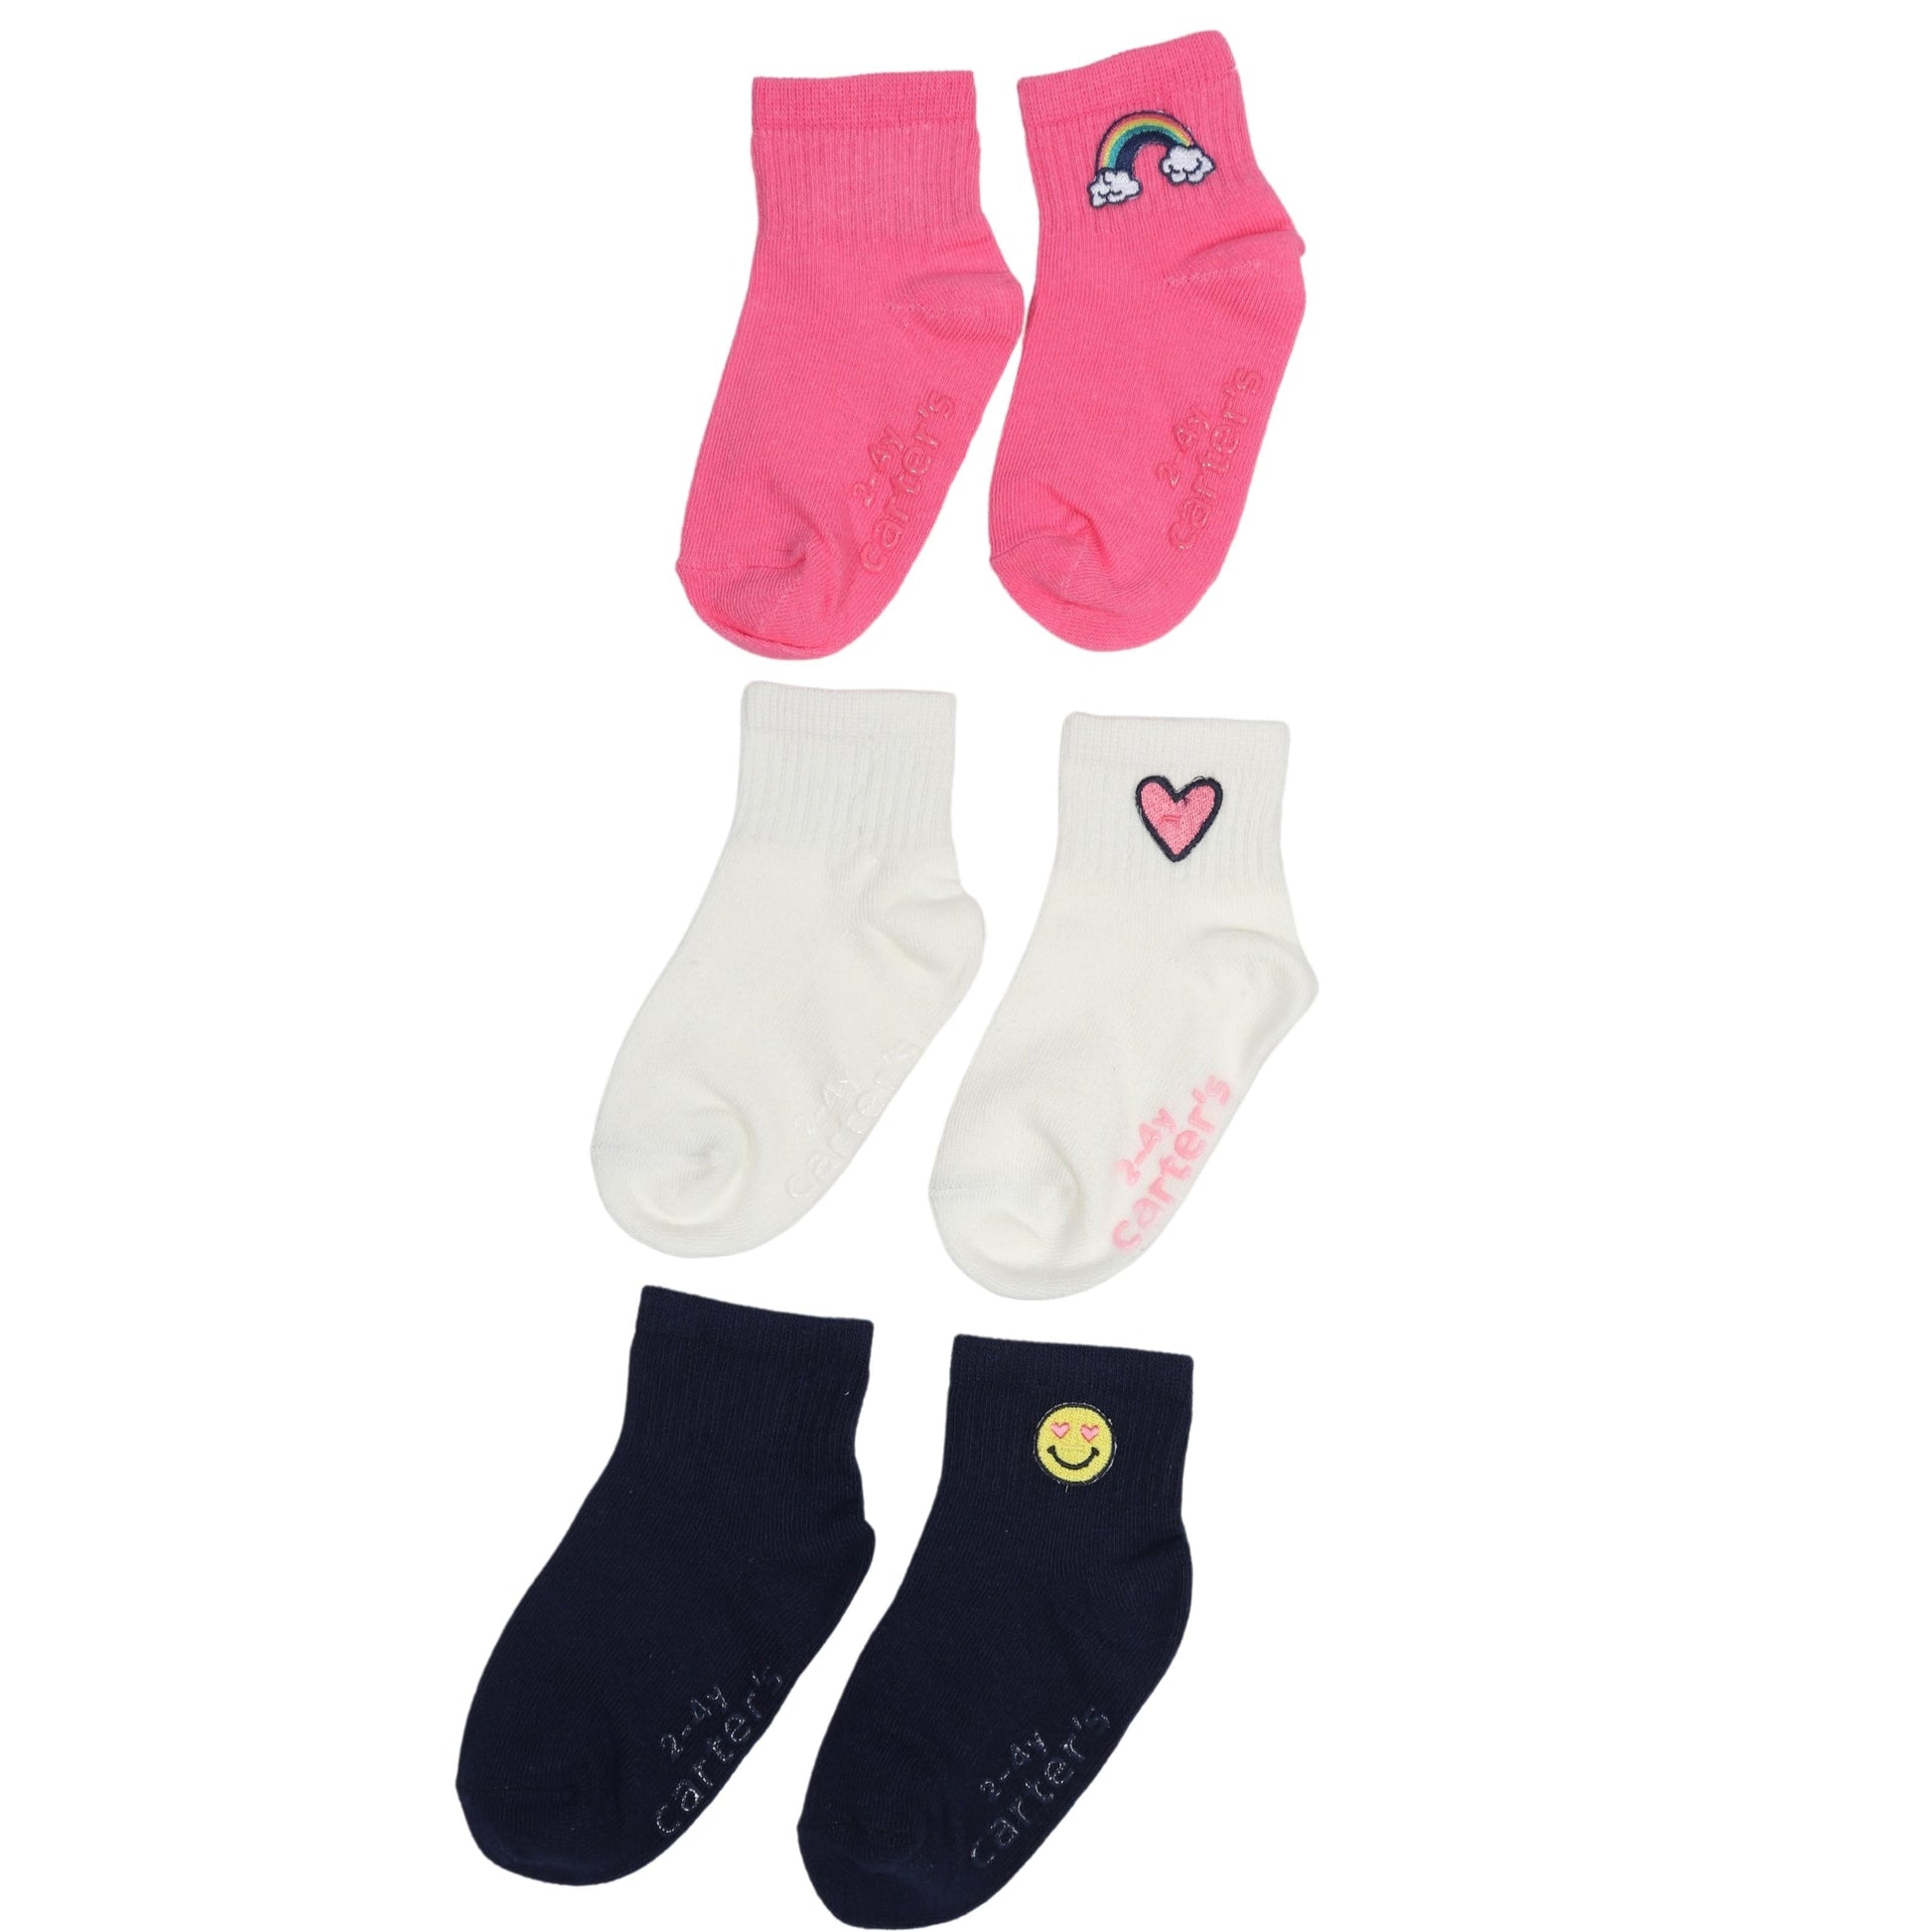 CARTER'S Clothing Accessories 2-4 Years / Multi-Color CARTER'S - Printed Three Pairs Of Socks